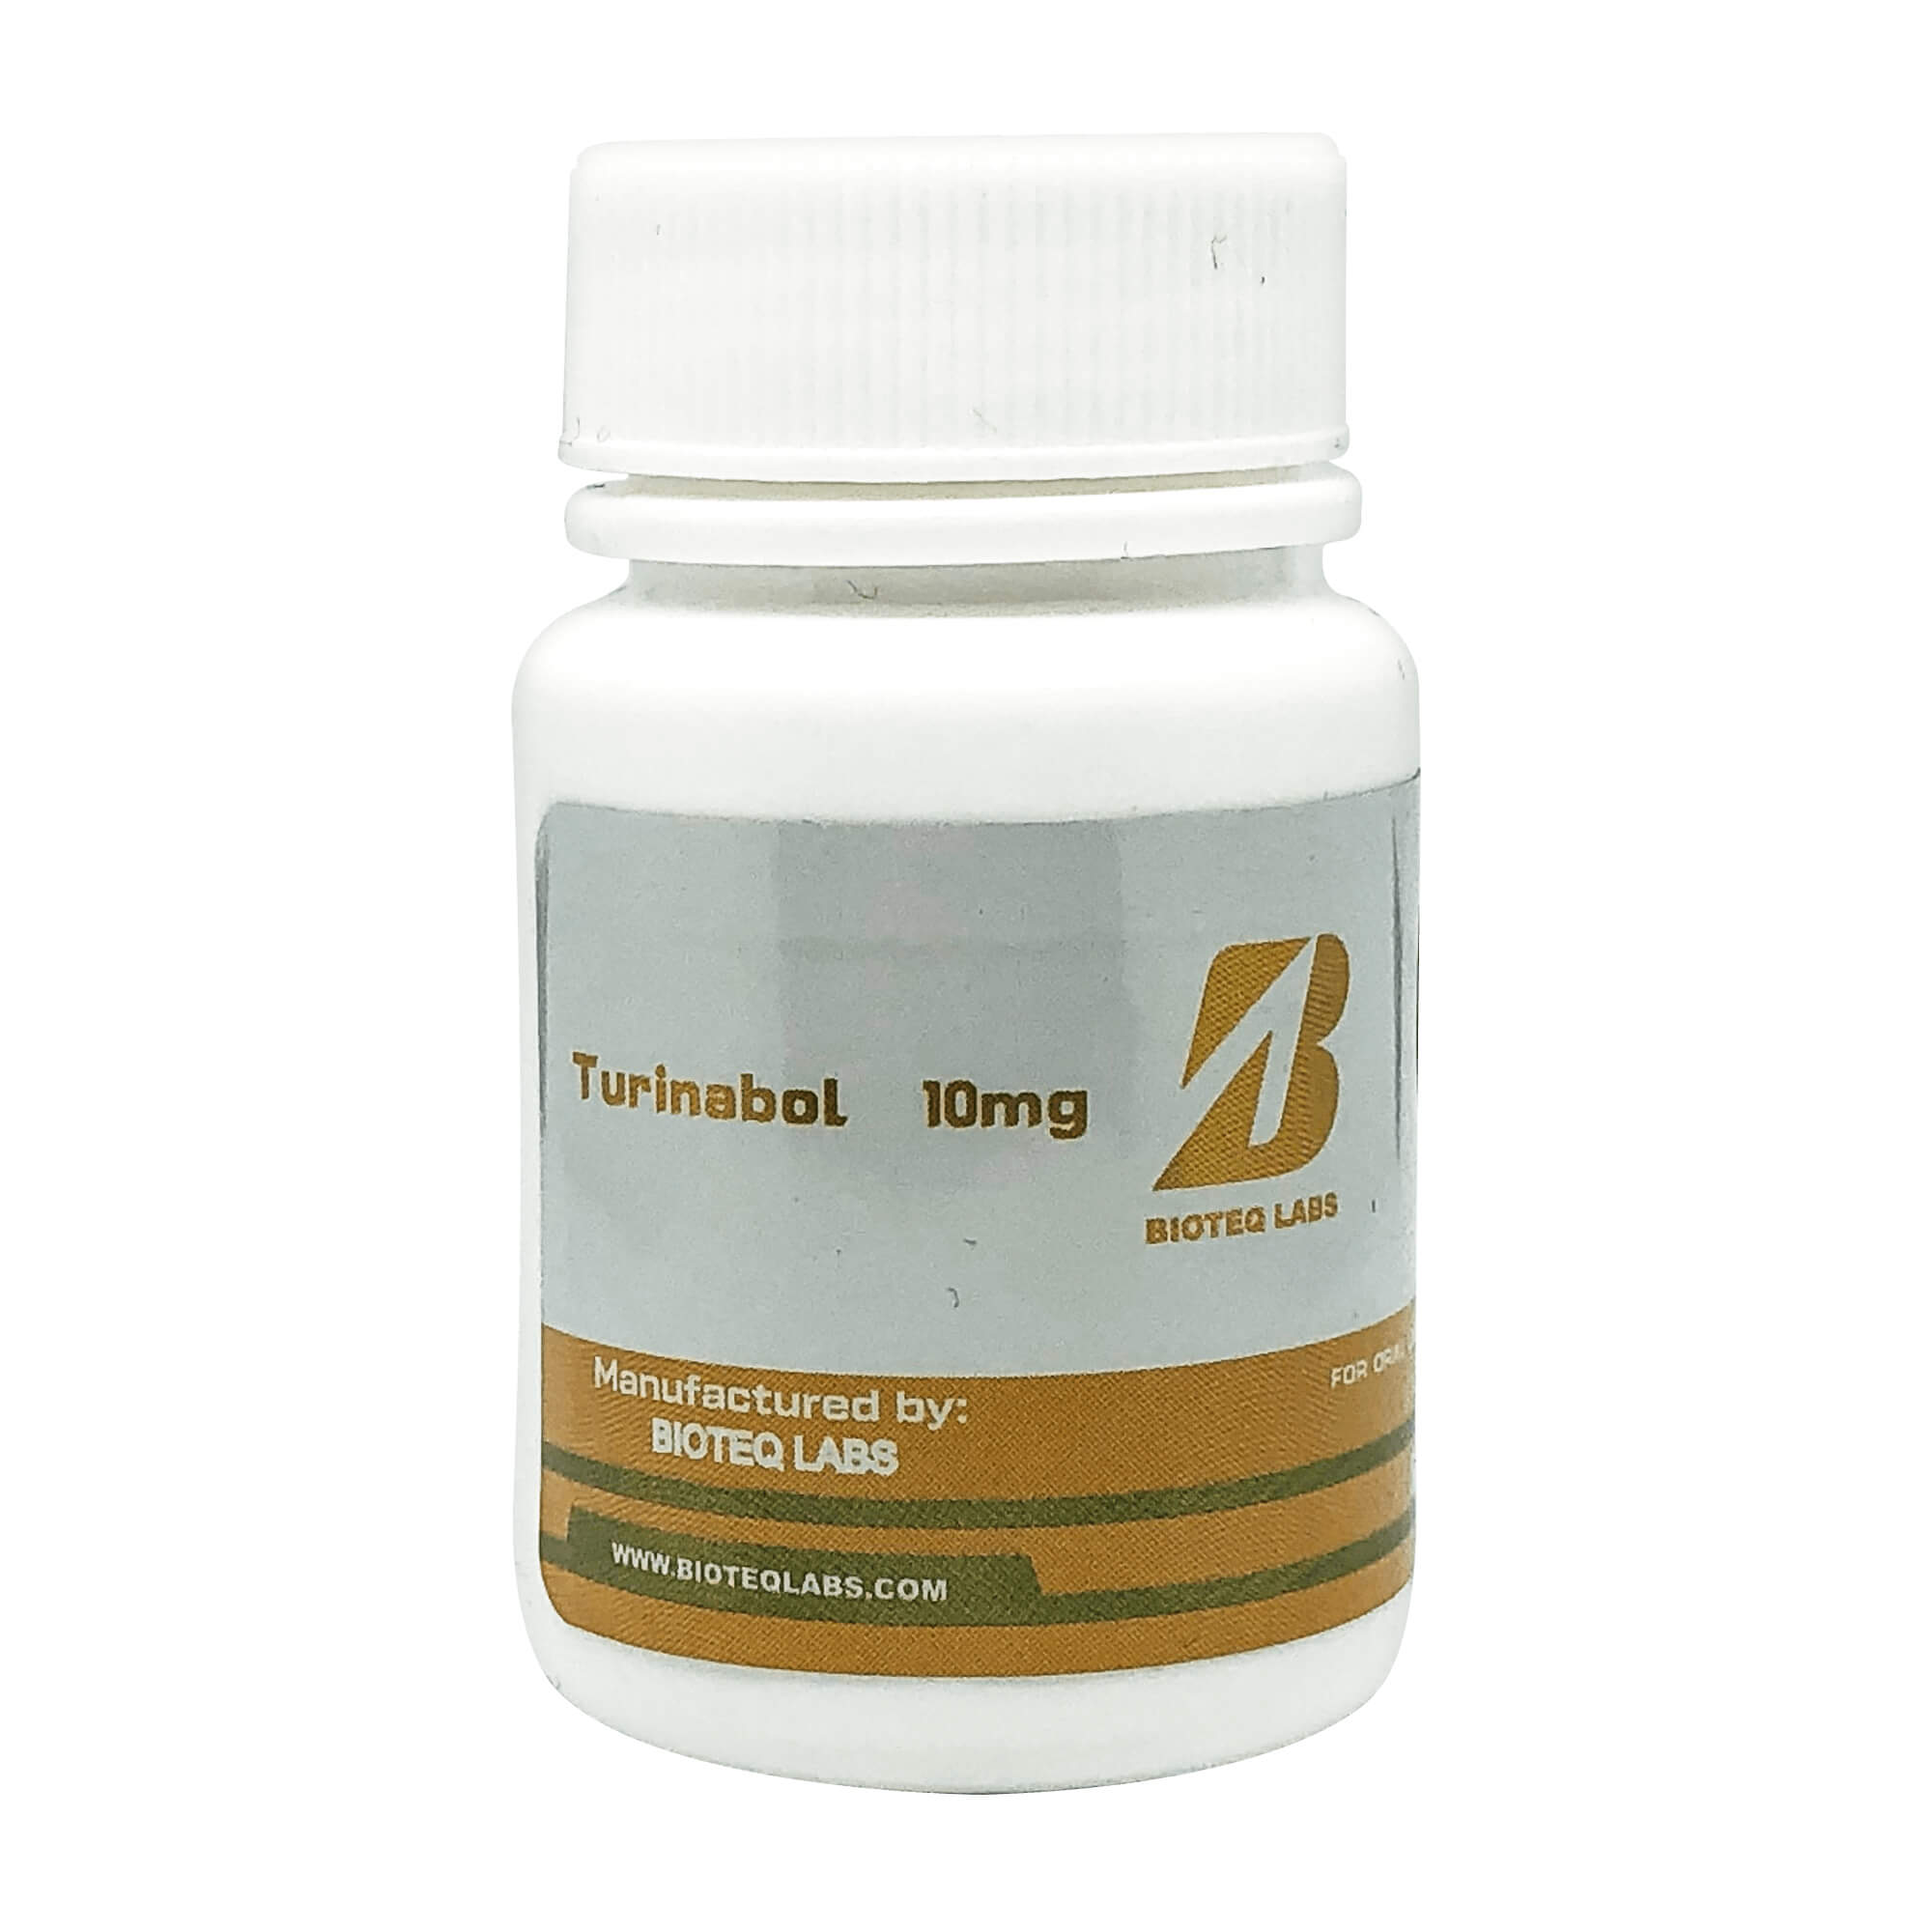 Wondering How To Make Your clenbuterol tabs Rock? Read This!